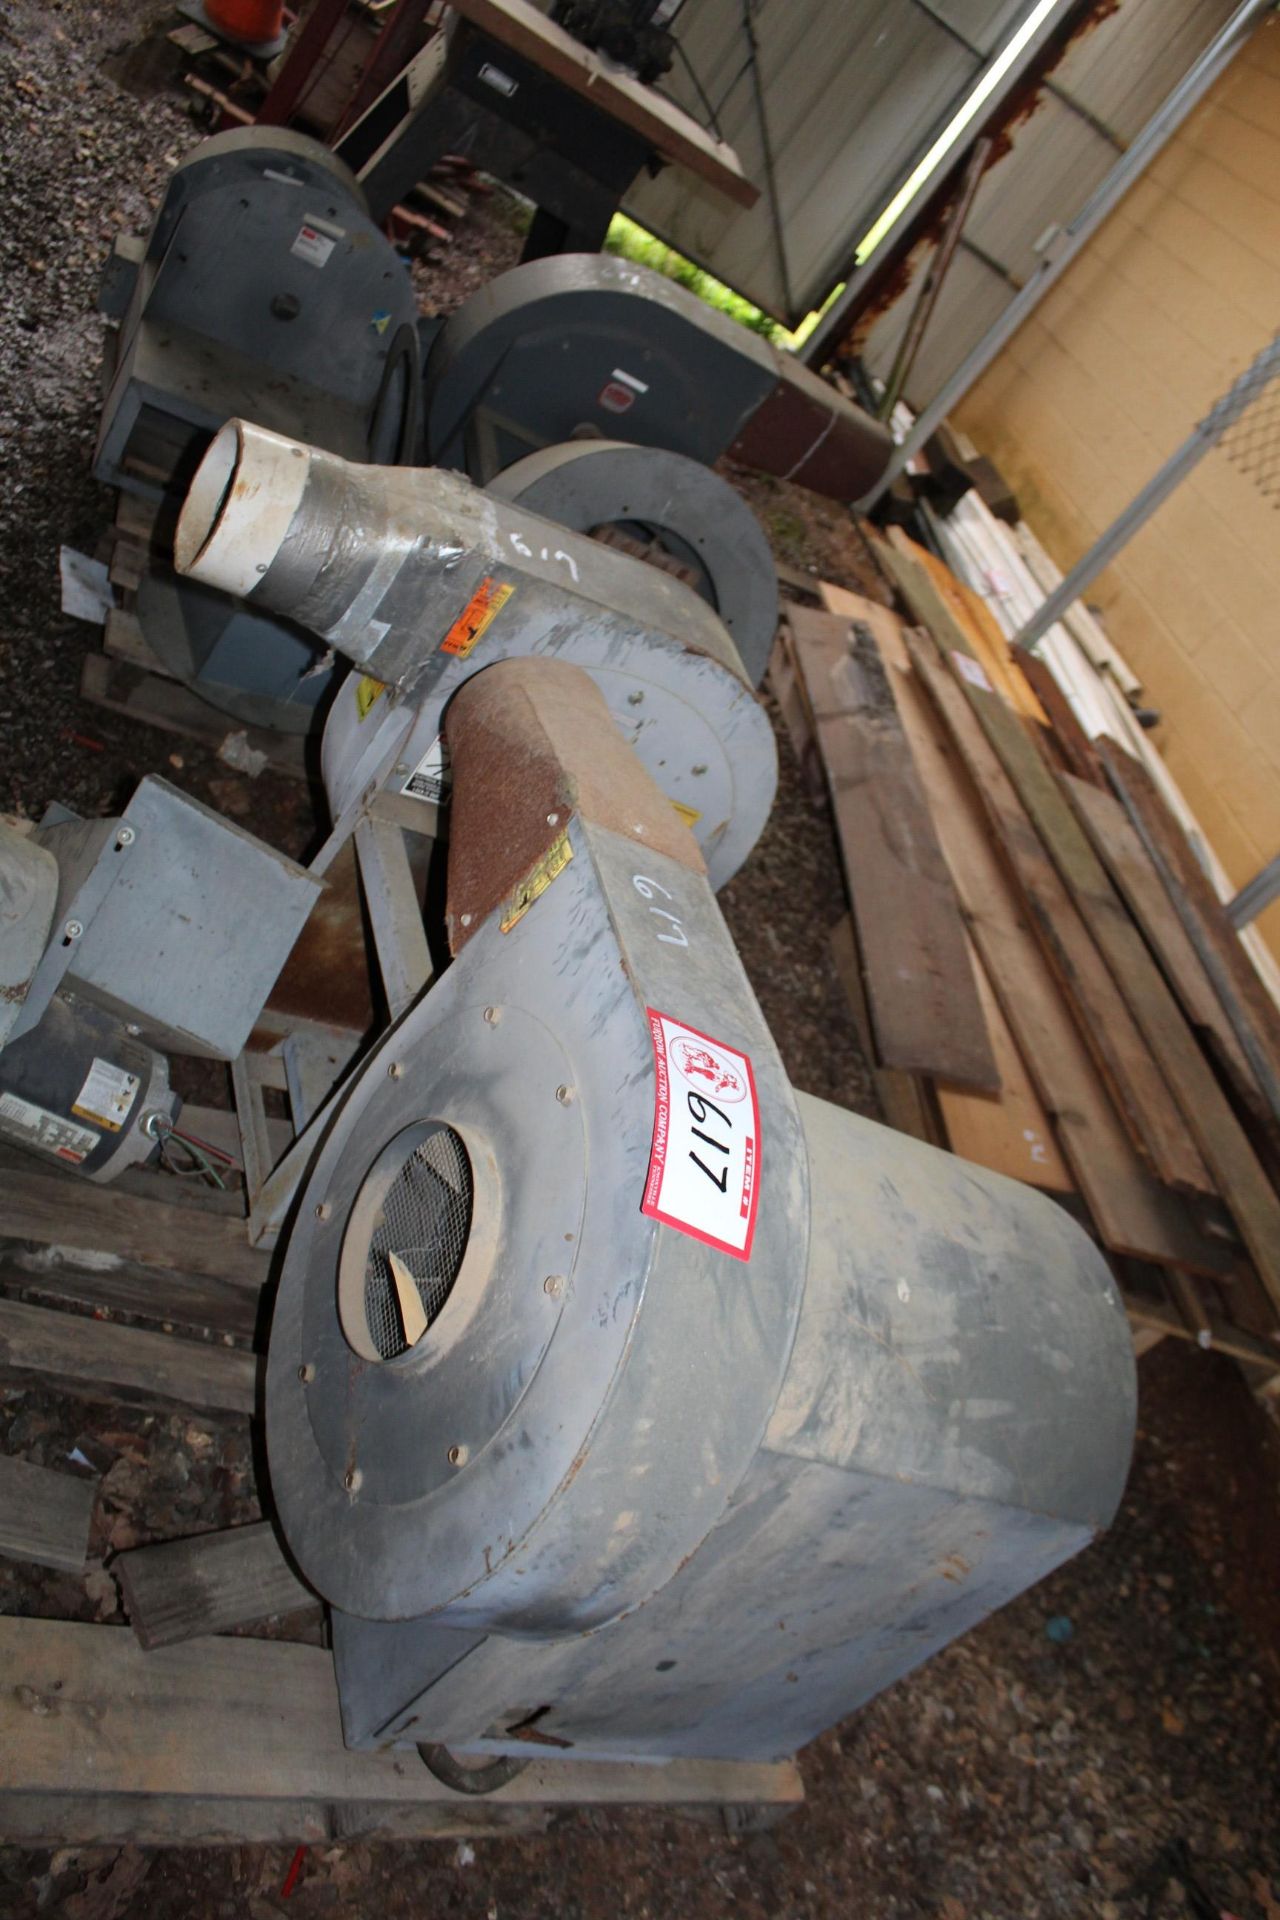 Contents of (2) Pallets- Electric Blowers (No Motors) and a Radial Arm Saw